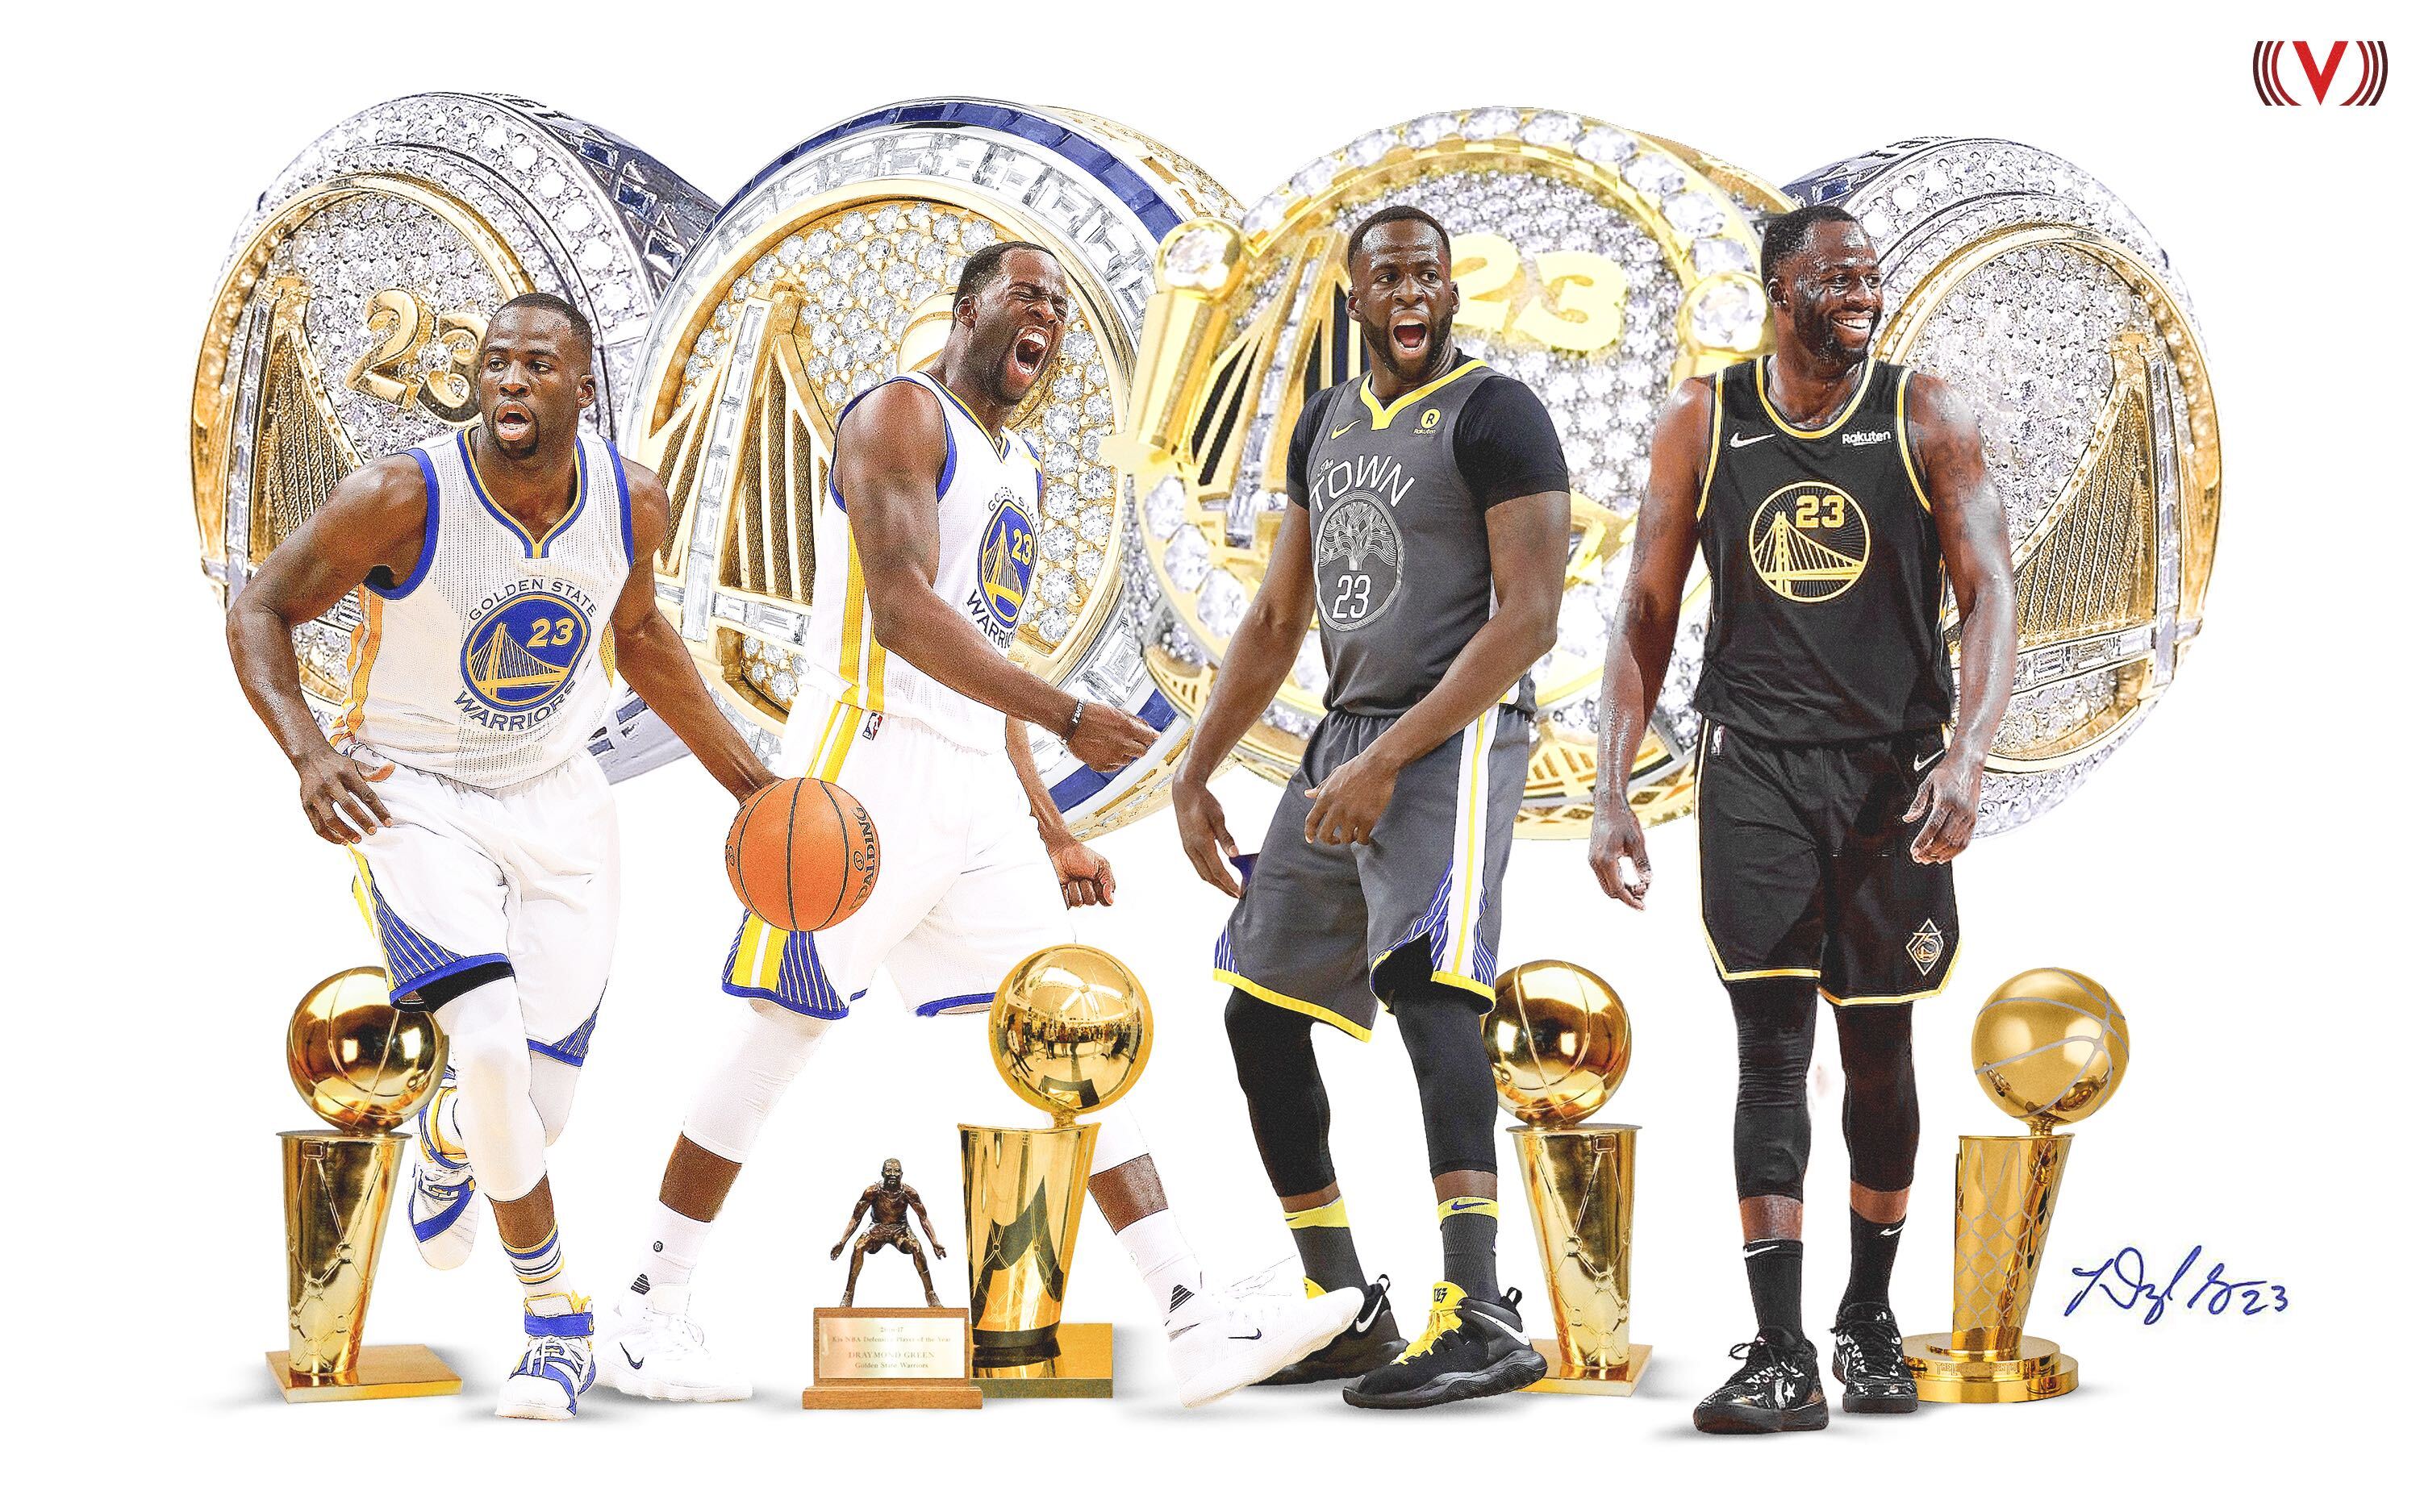 Golden State Warriors on X: Welcome to the Draymond Green